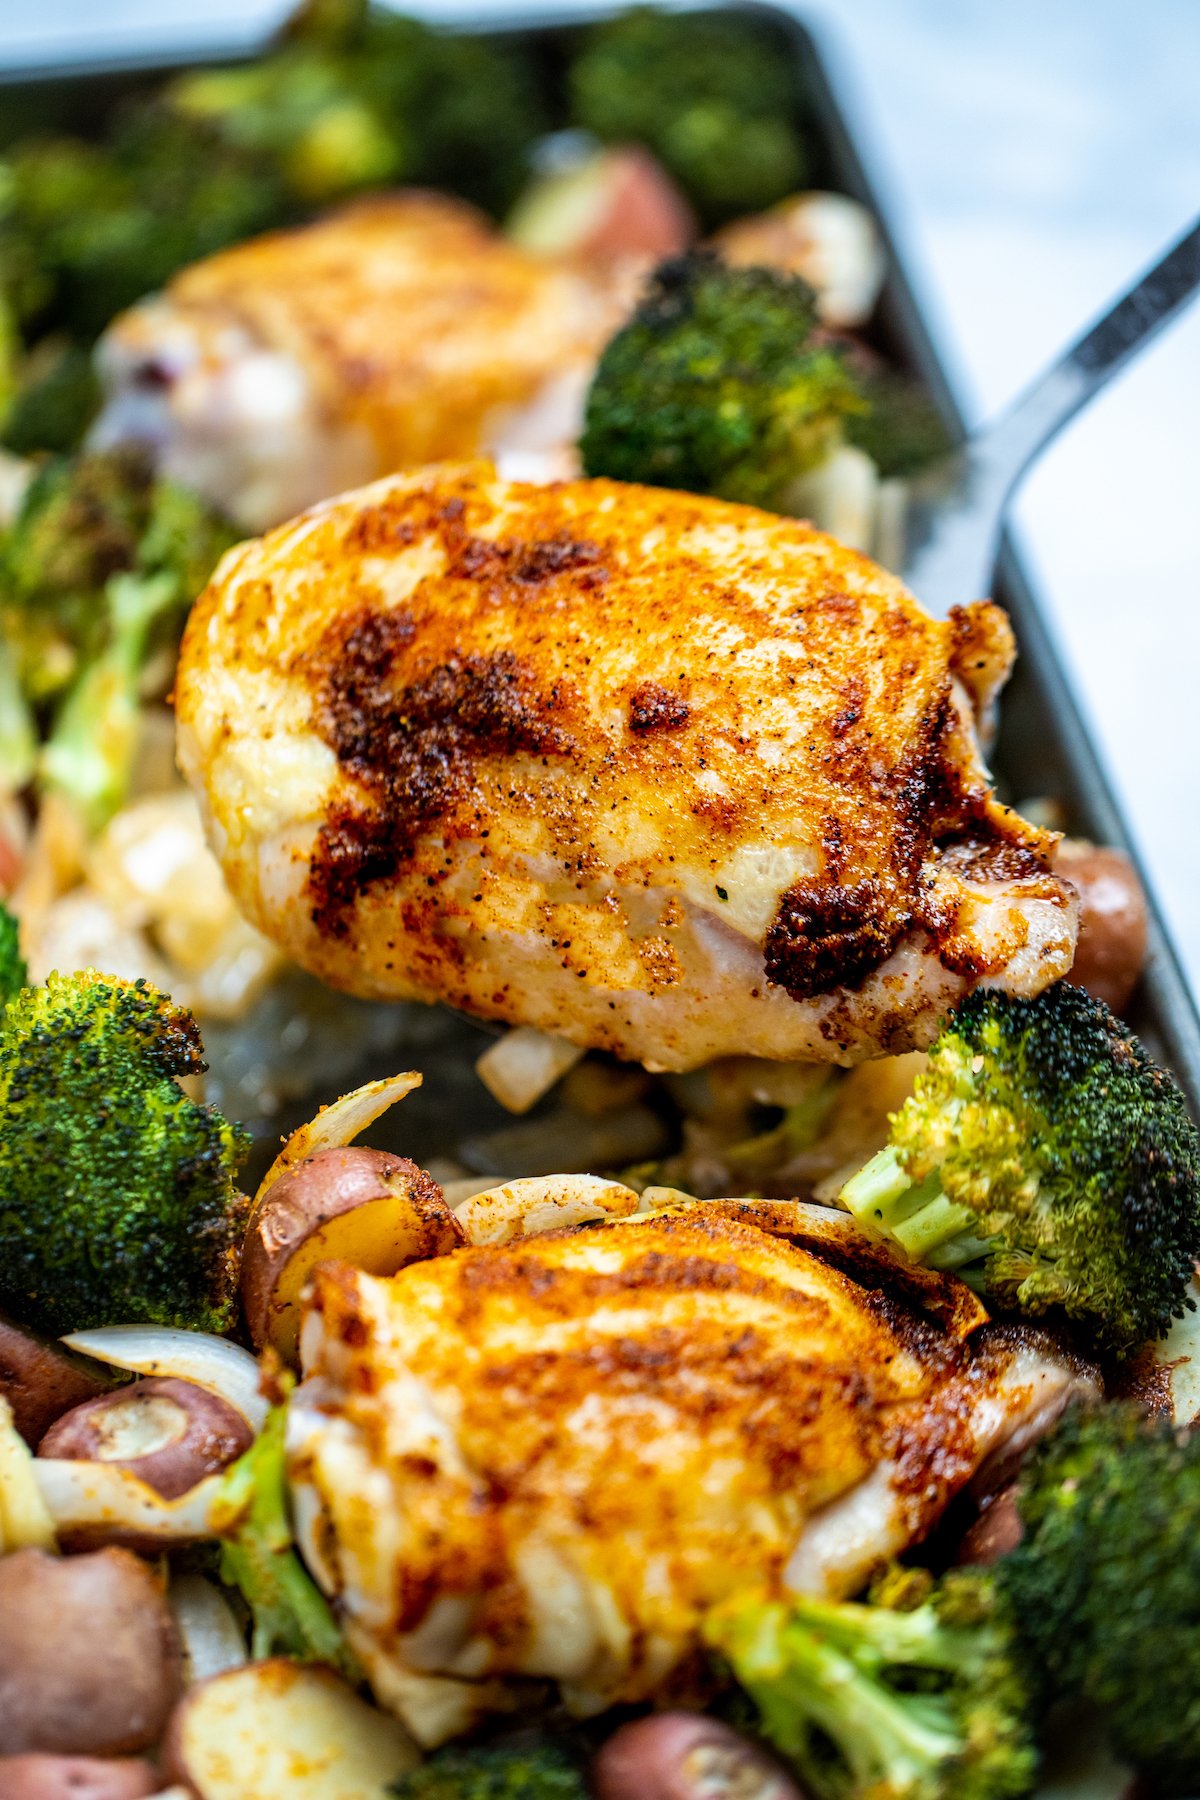 A sheet pan of broccoli, potatoes, onion, and chicken thighs with golden brown skin and a spatula lifting one up.